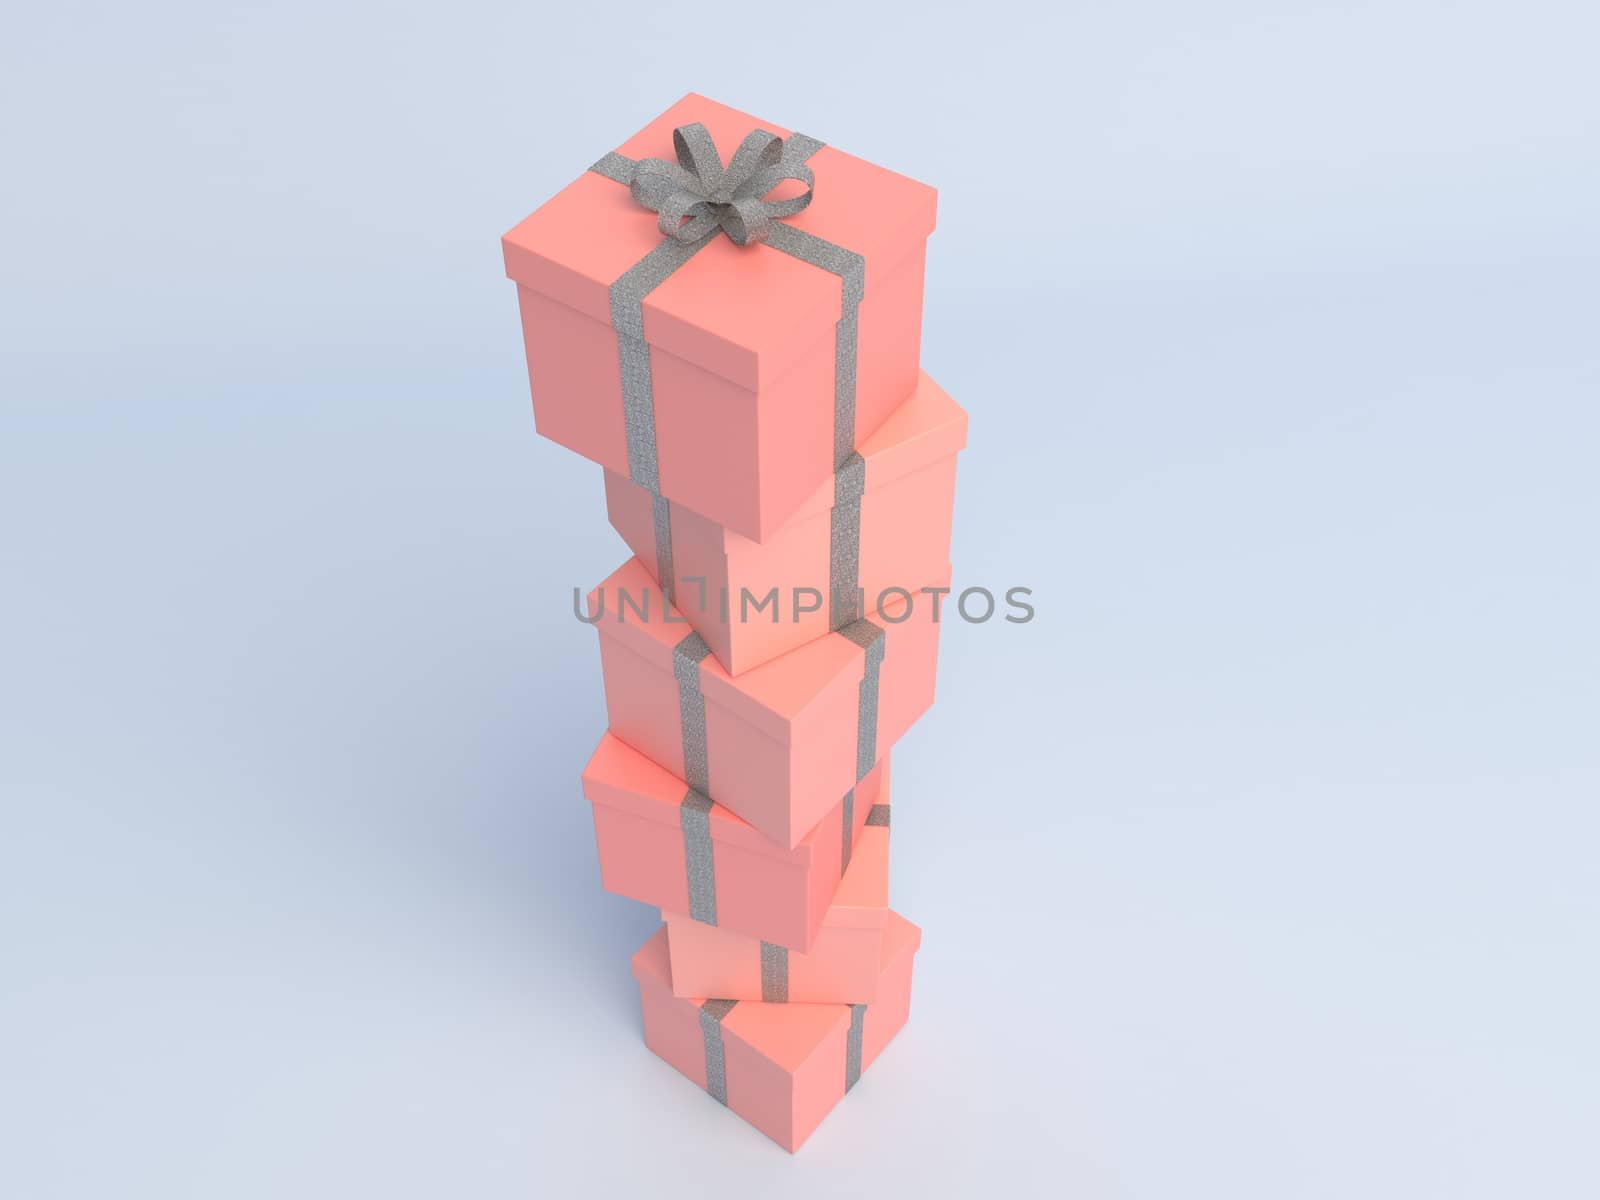 Stacked gift box on pastel blue background. 3d render